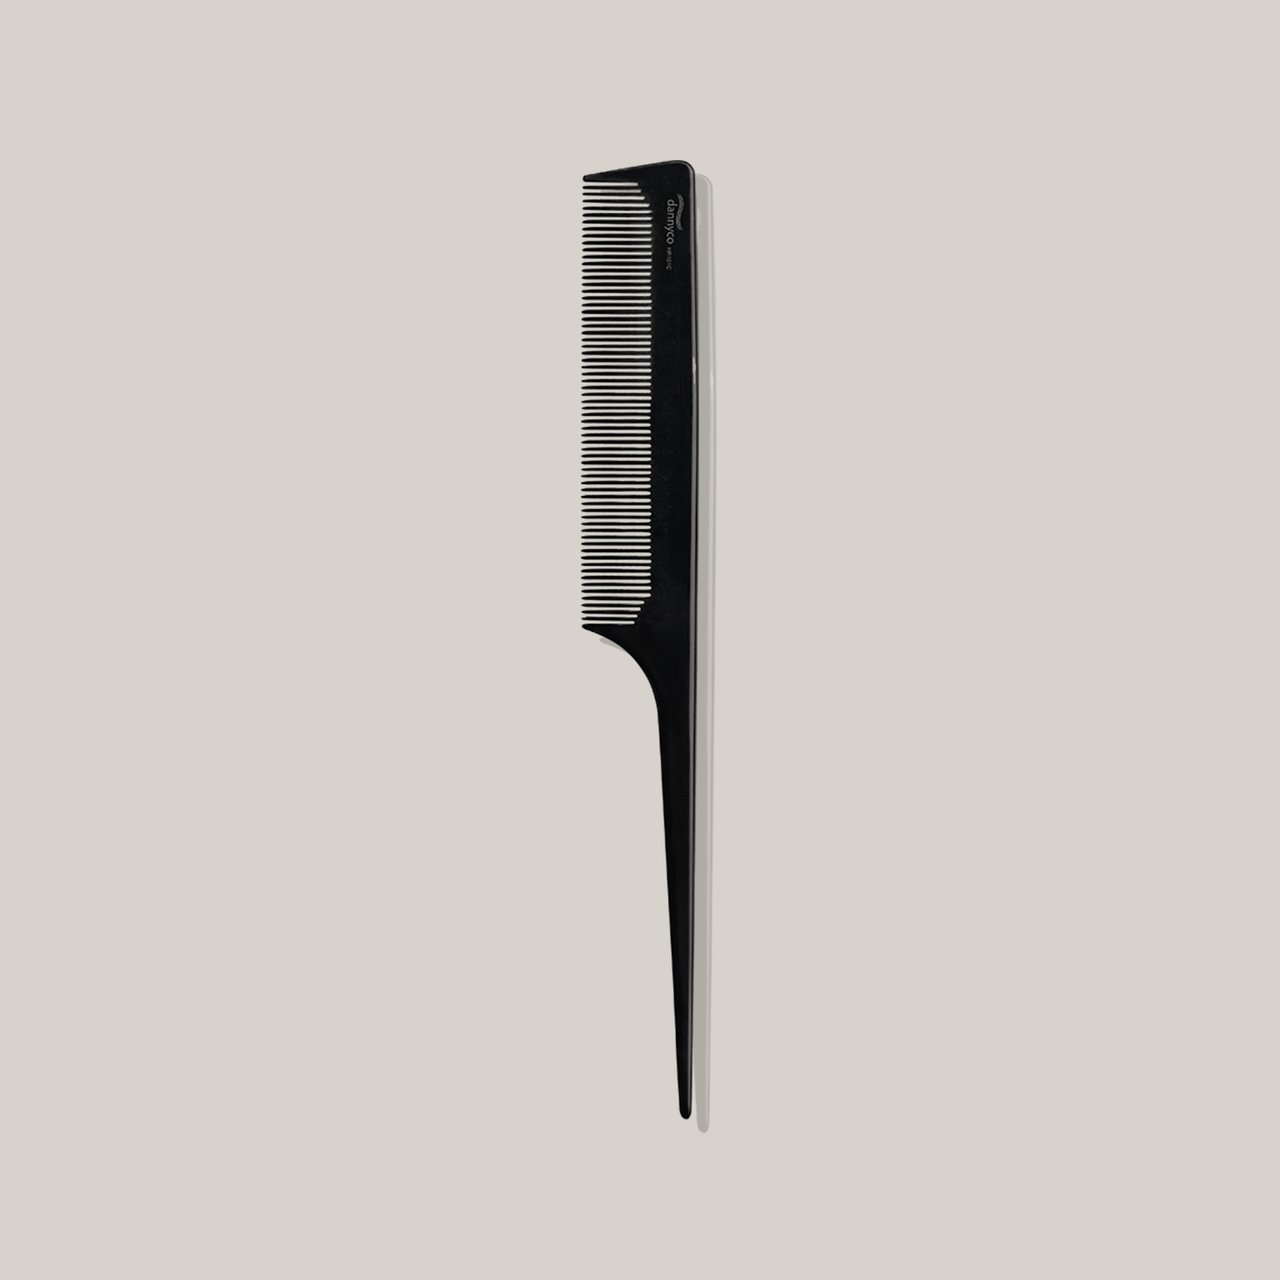 Dannyco Fine Tooth Pin Tail Comb HR101C 